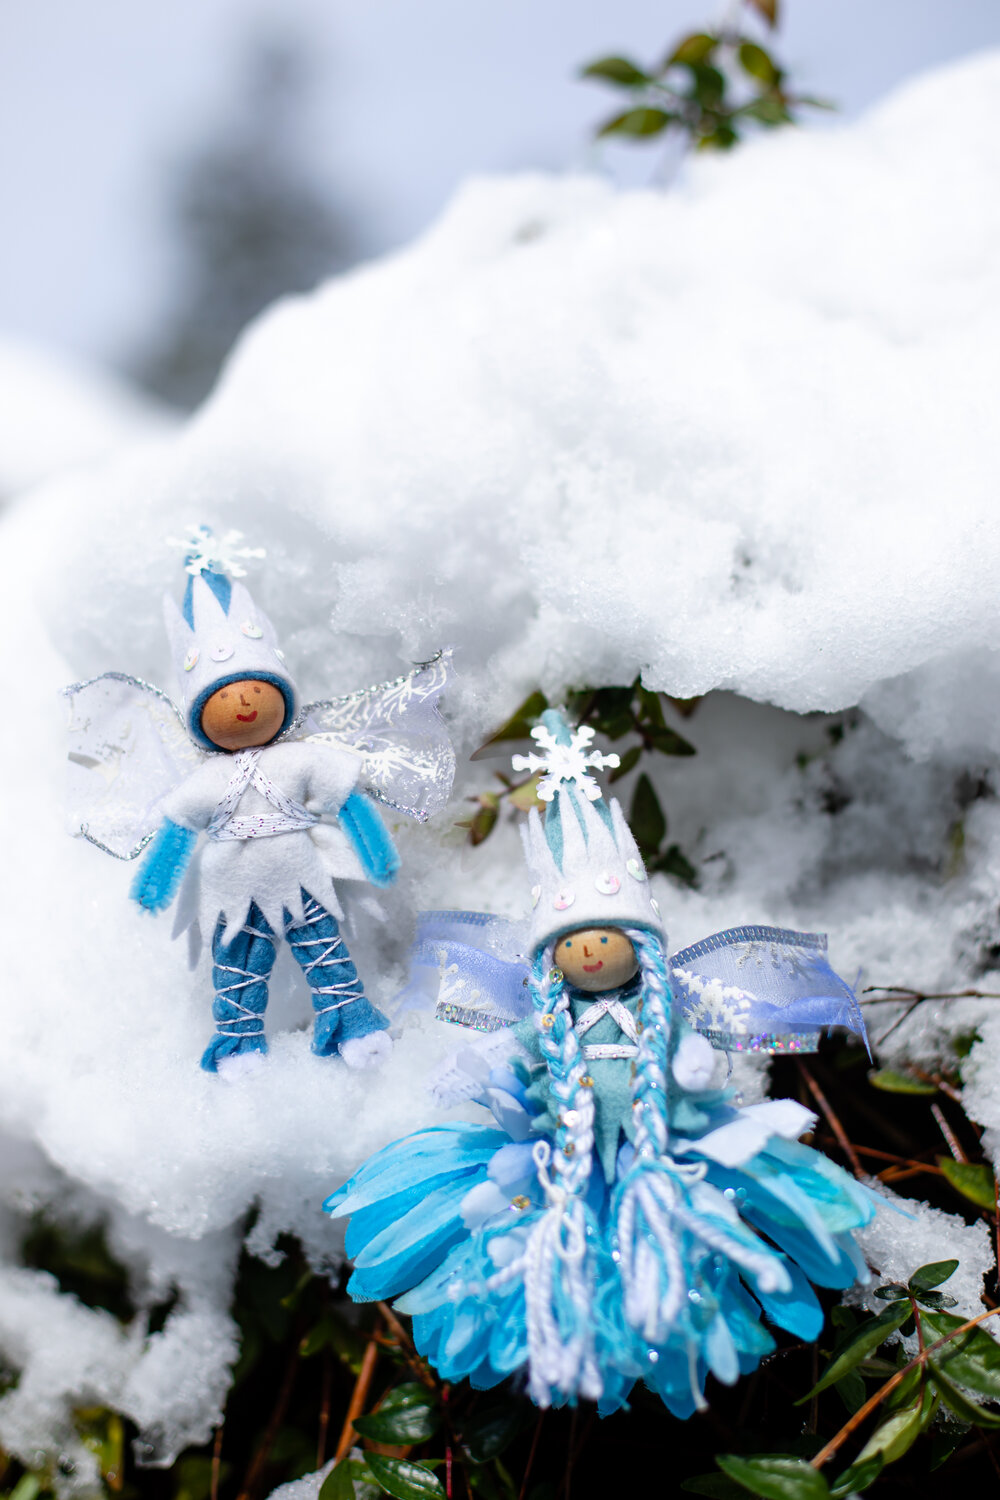 Handmade Holidays Winter Fairies with Forest Fairy Crafts for Seasonal Gifts and Decor